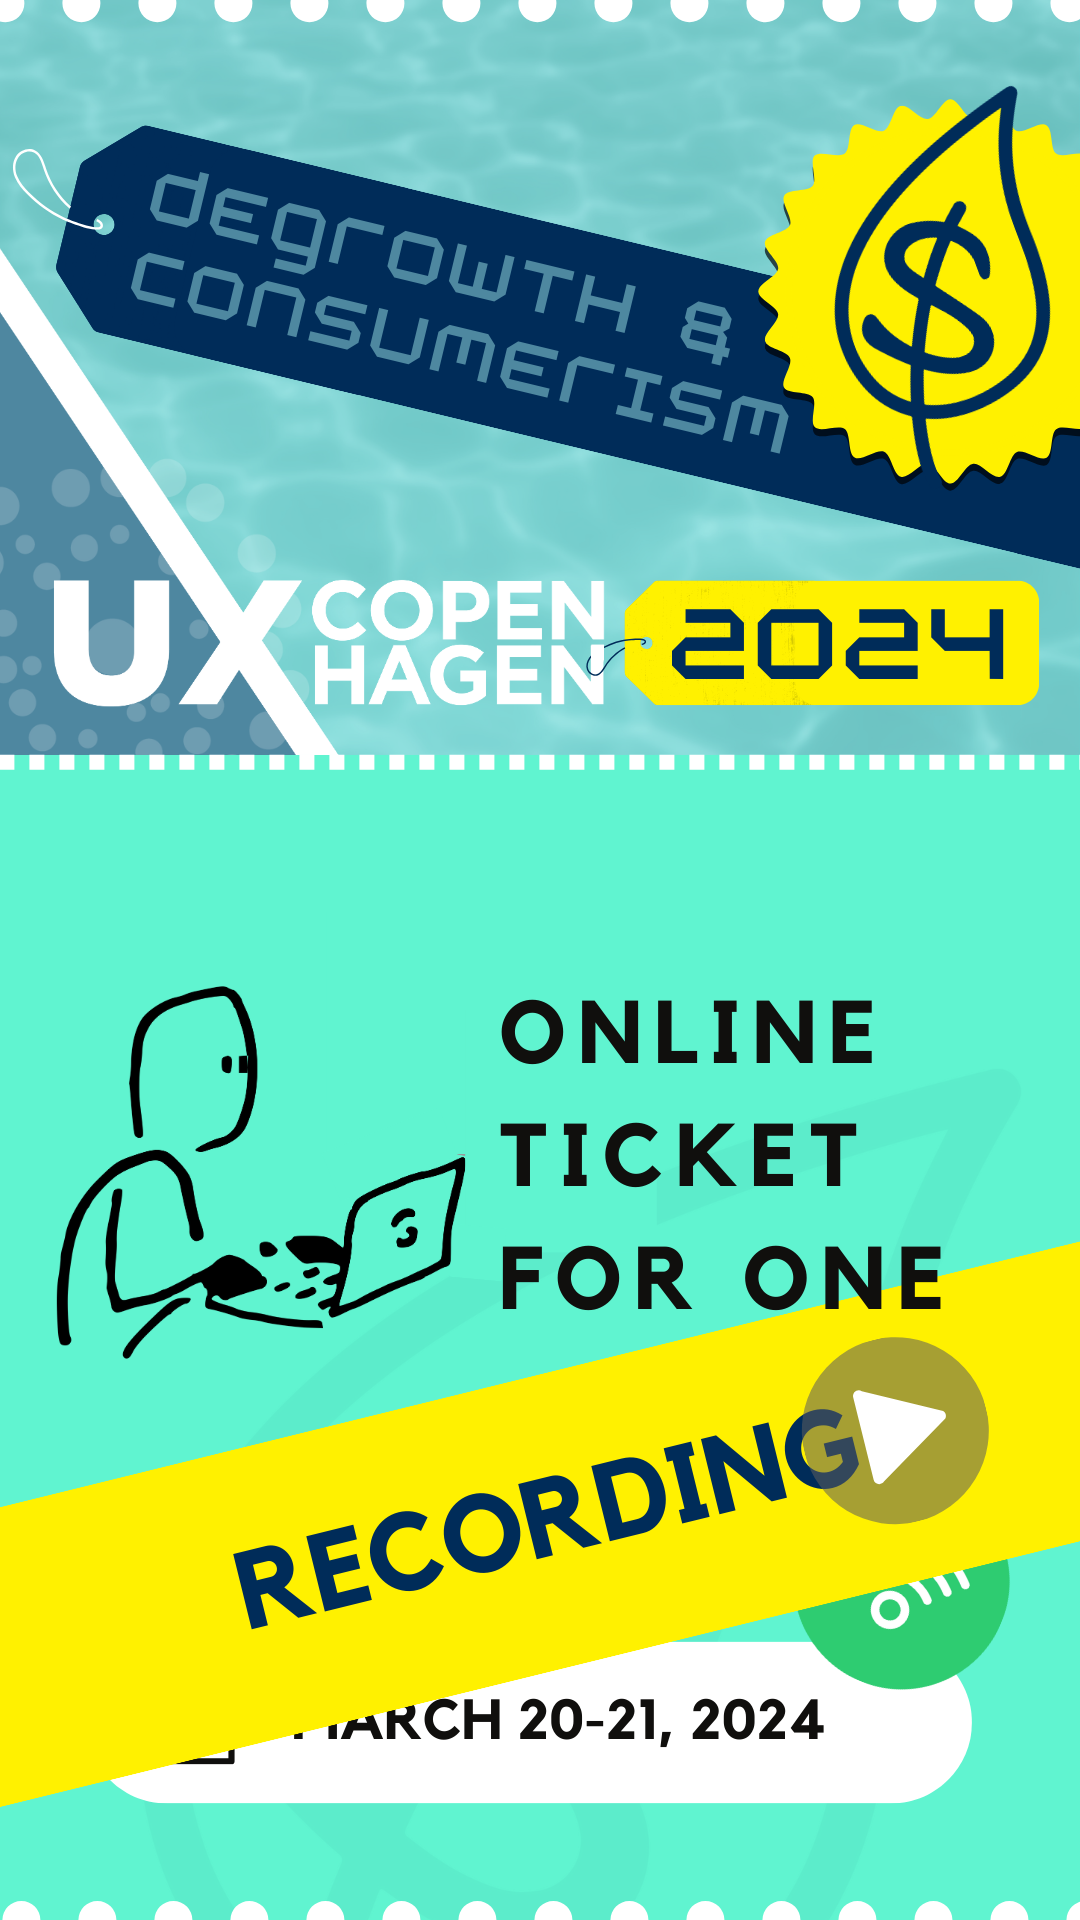 Ticket for the recording of the UX Copenhagen 2024 conference